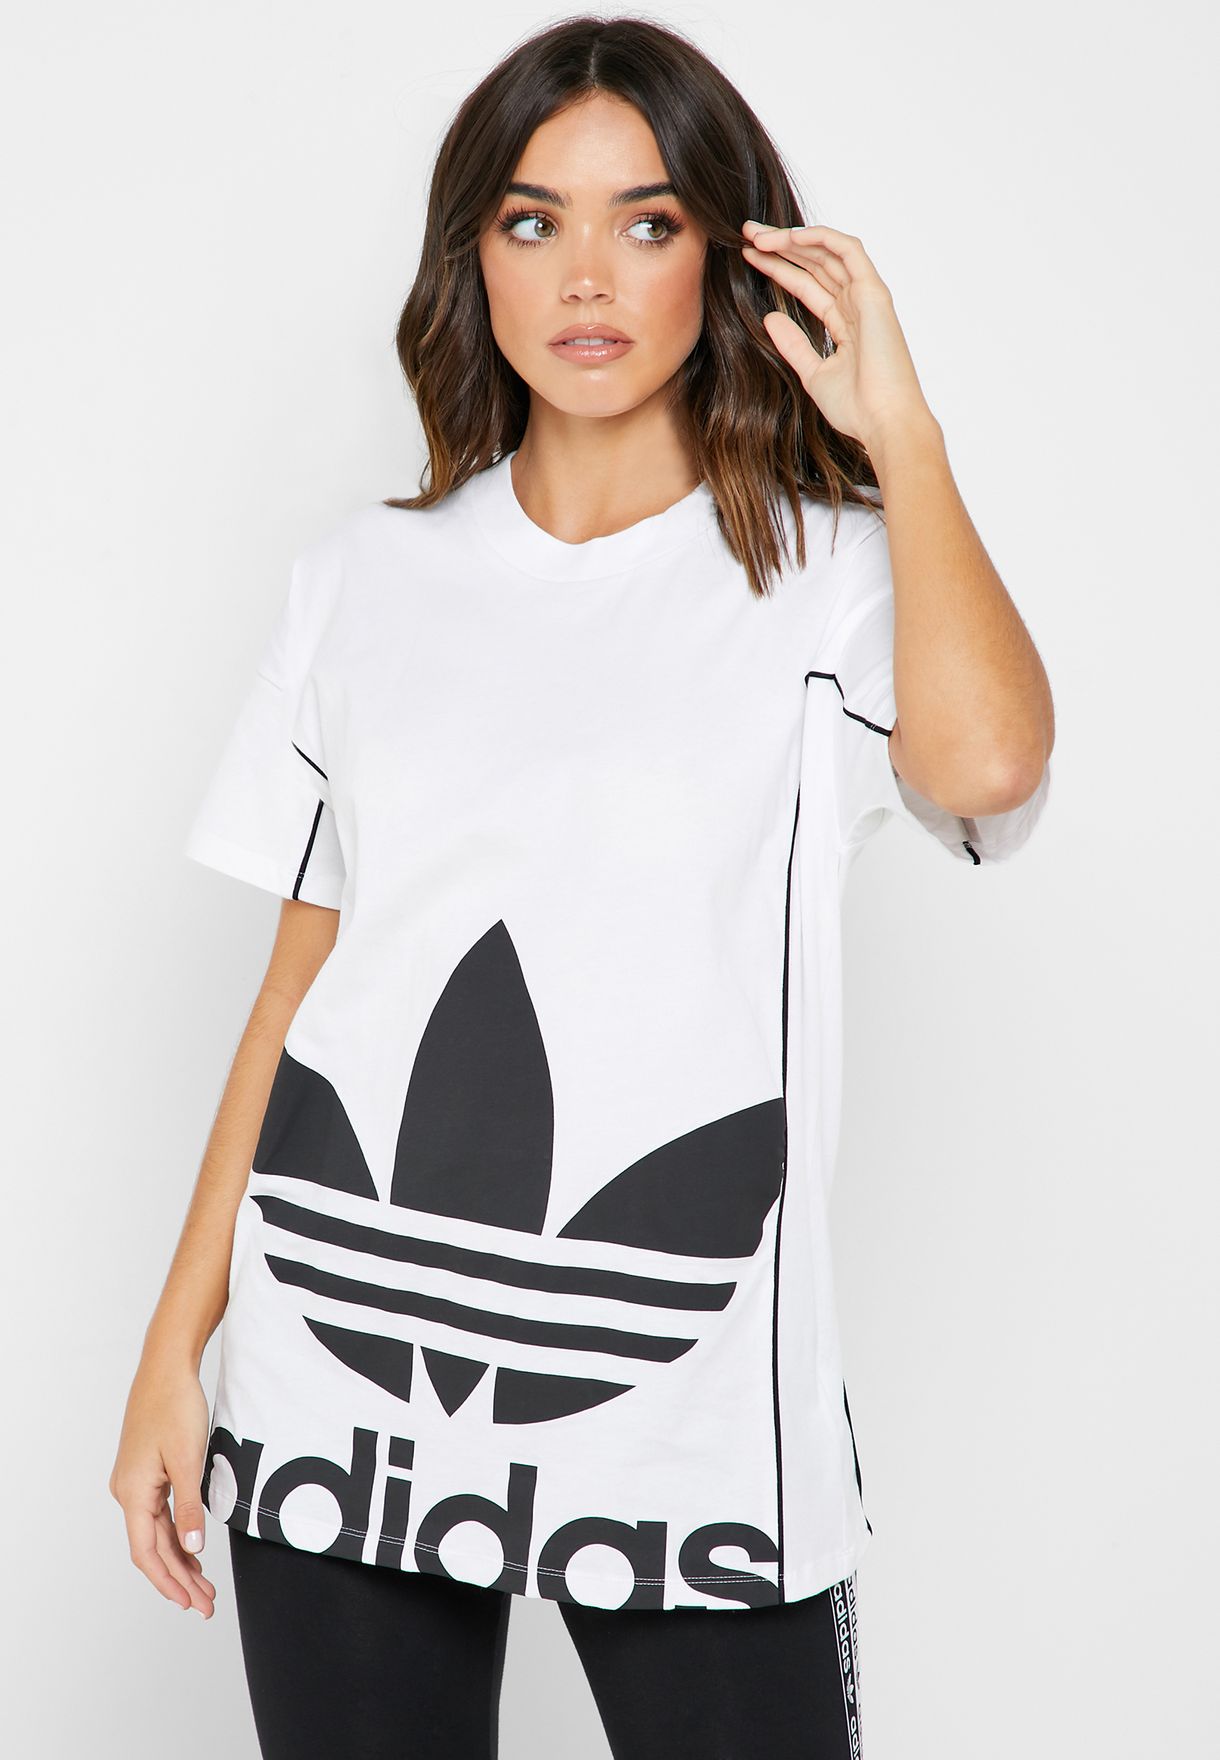 domain Does not move Bald Buy adidas Originals white Trefoil Long T-Shirt for Women in MENA, Worldwide